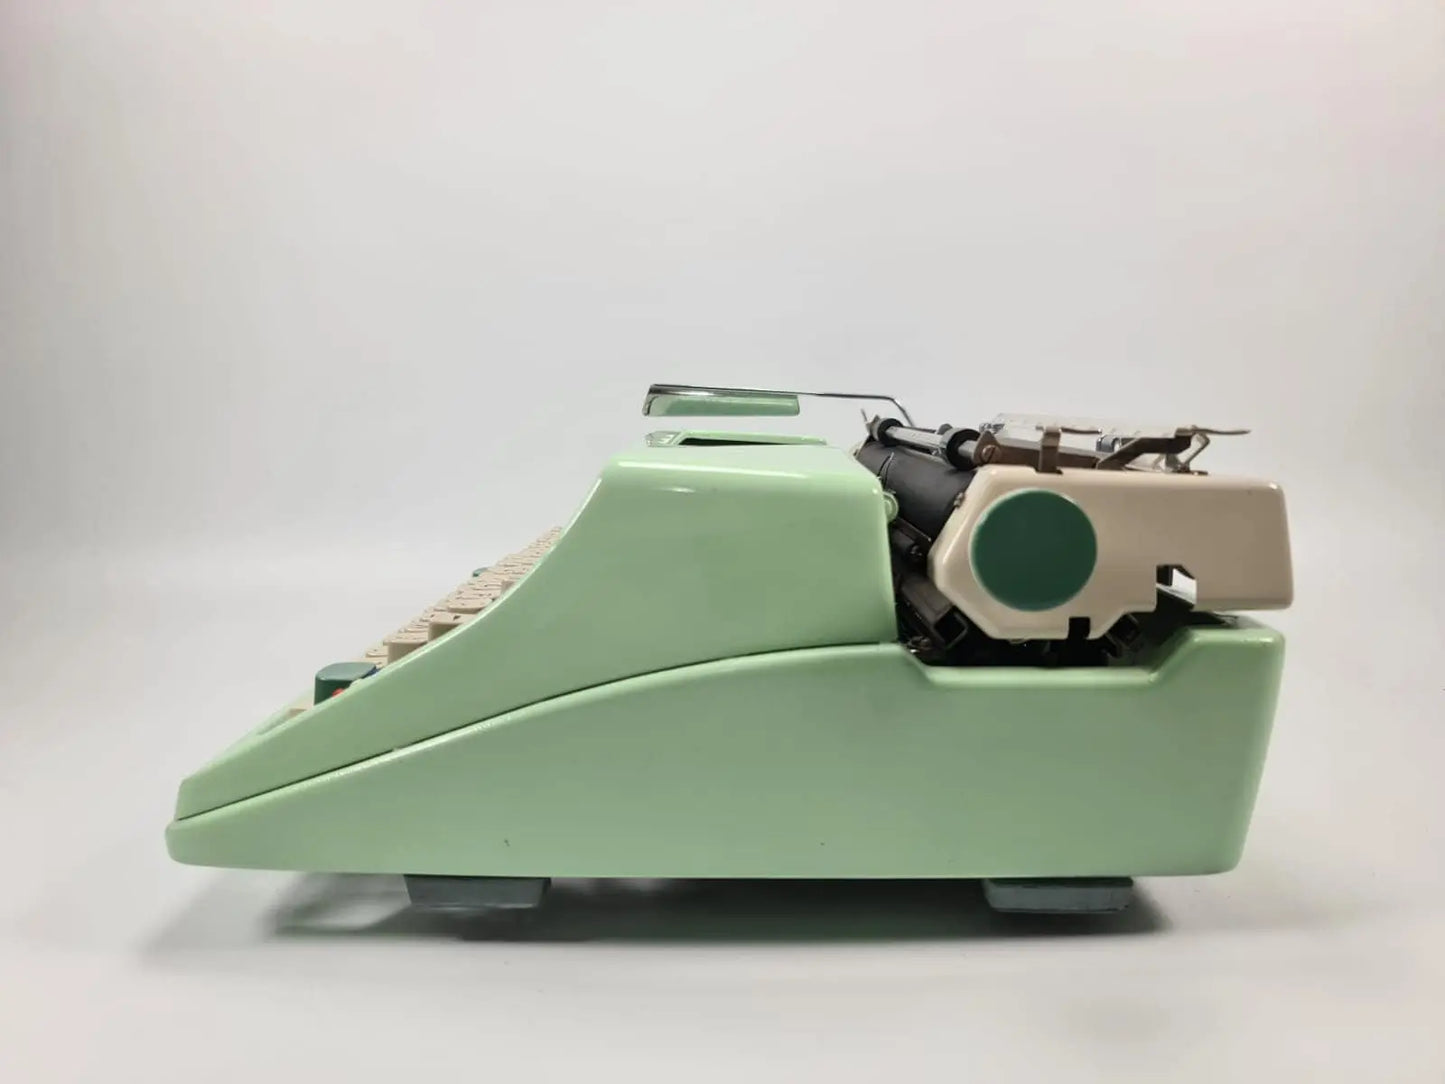 Limited Edition Olympia SM8 Mint Green Typewriter, Vintage, Mint Condition, Manual Portable, Professionally Serviced by Typewriter.Company - ElGranero Typewriter.Company